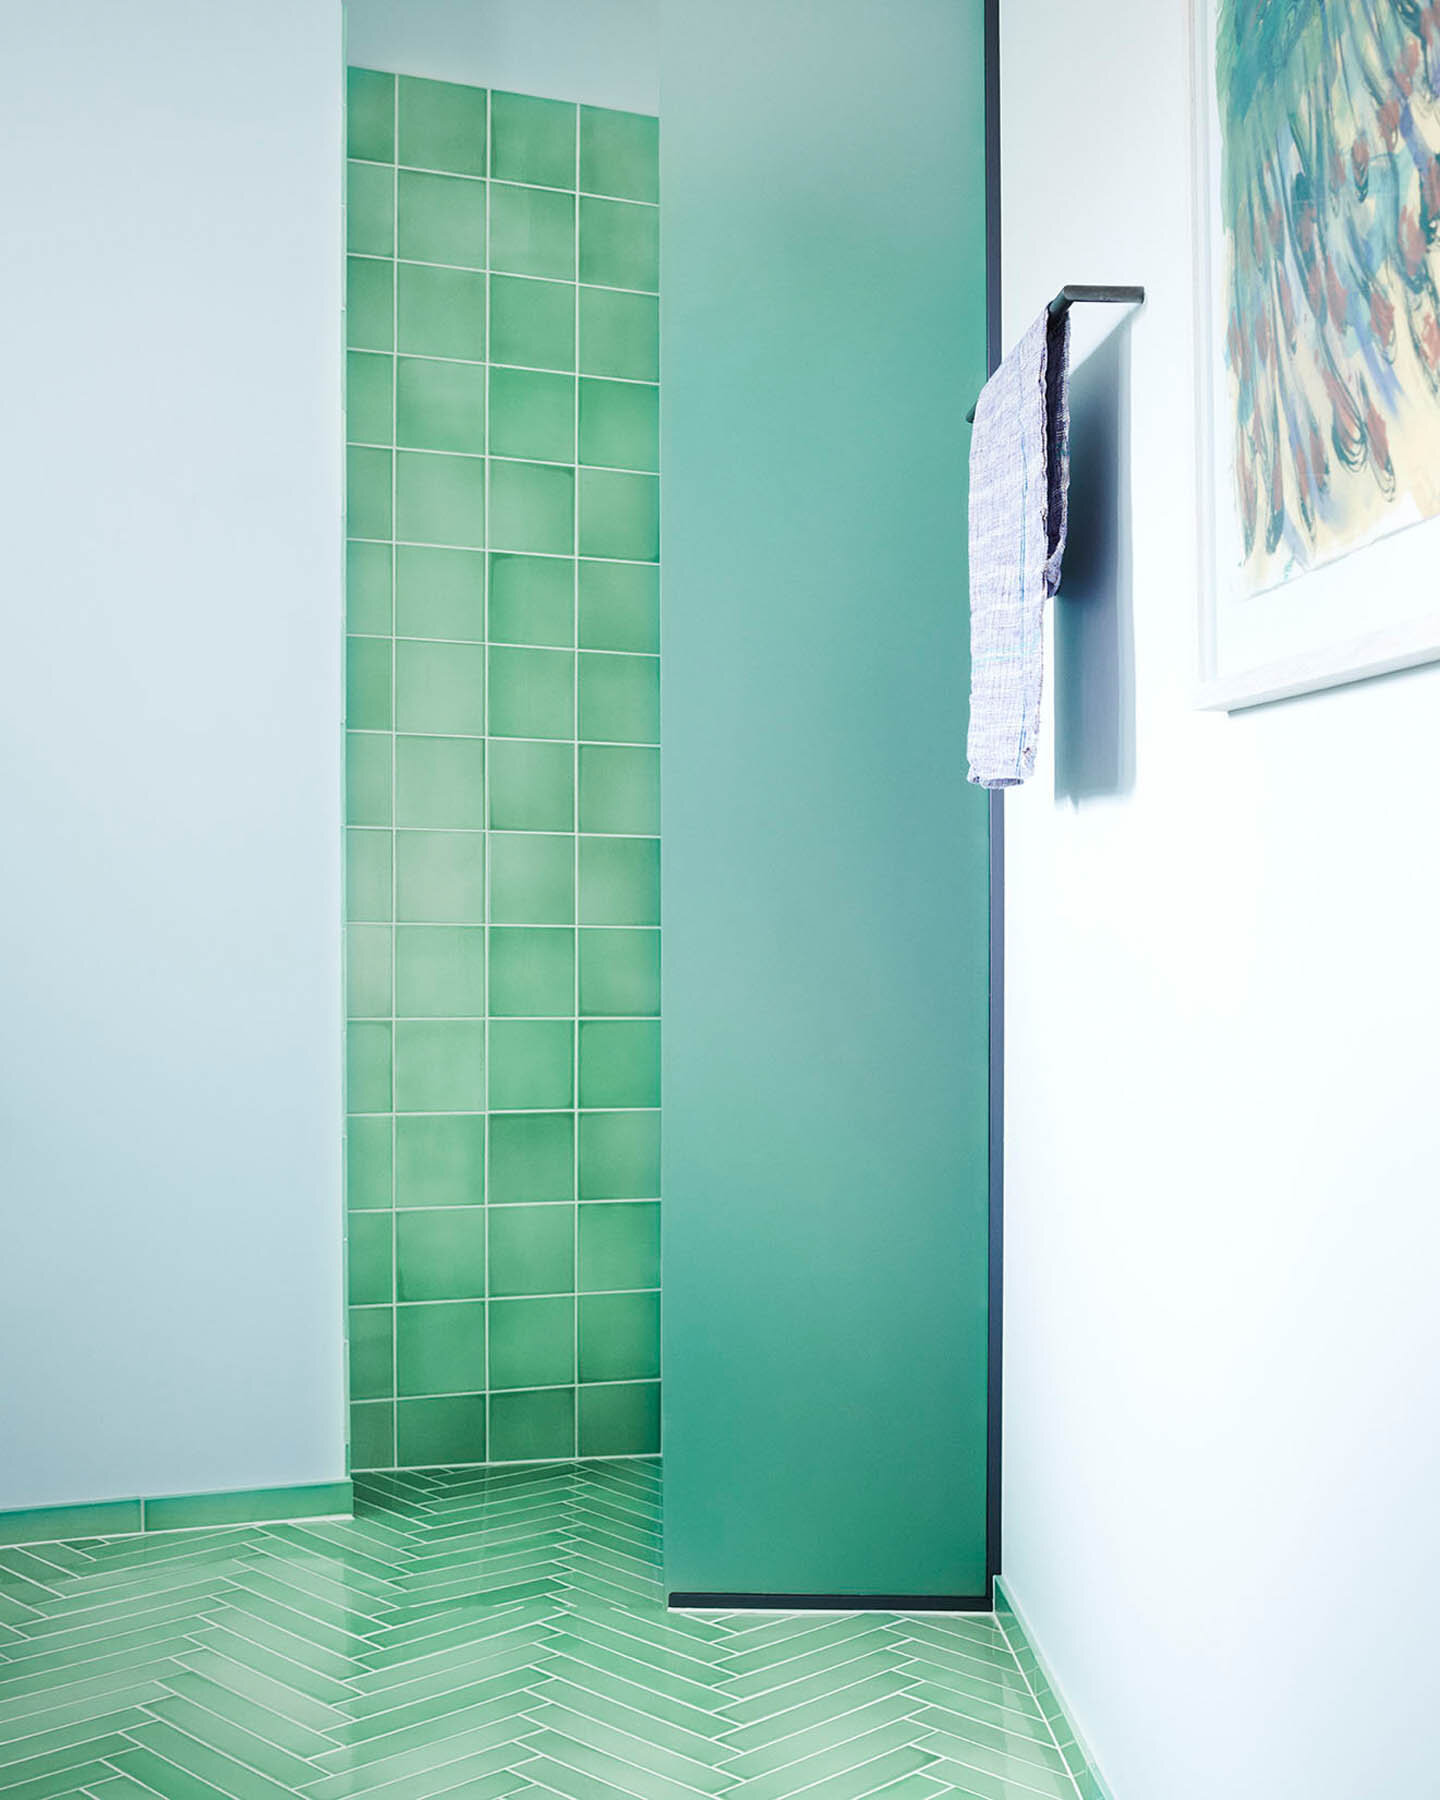  Floor with lava stone tiles in format 5x30x1 cm glazed with ‘Green Earrings Shiny Crystal’  Wall with clay tiles in format 15x15x1 cm glazed with ‘Green Earrings Shiny Crystal’ 